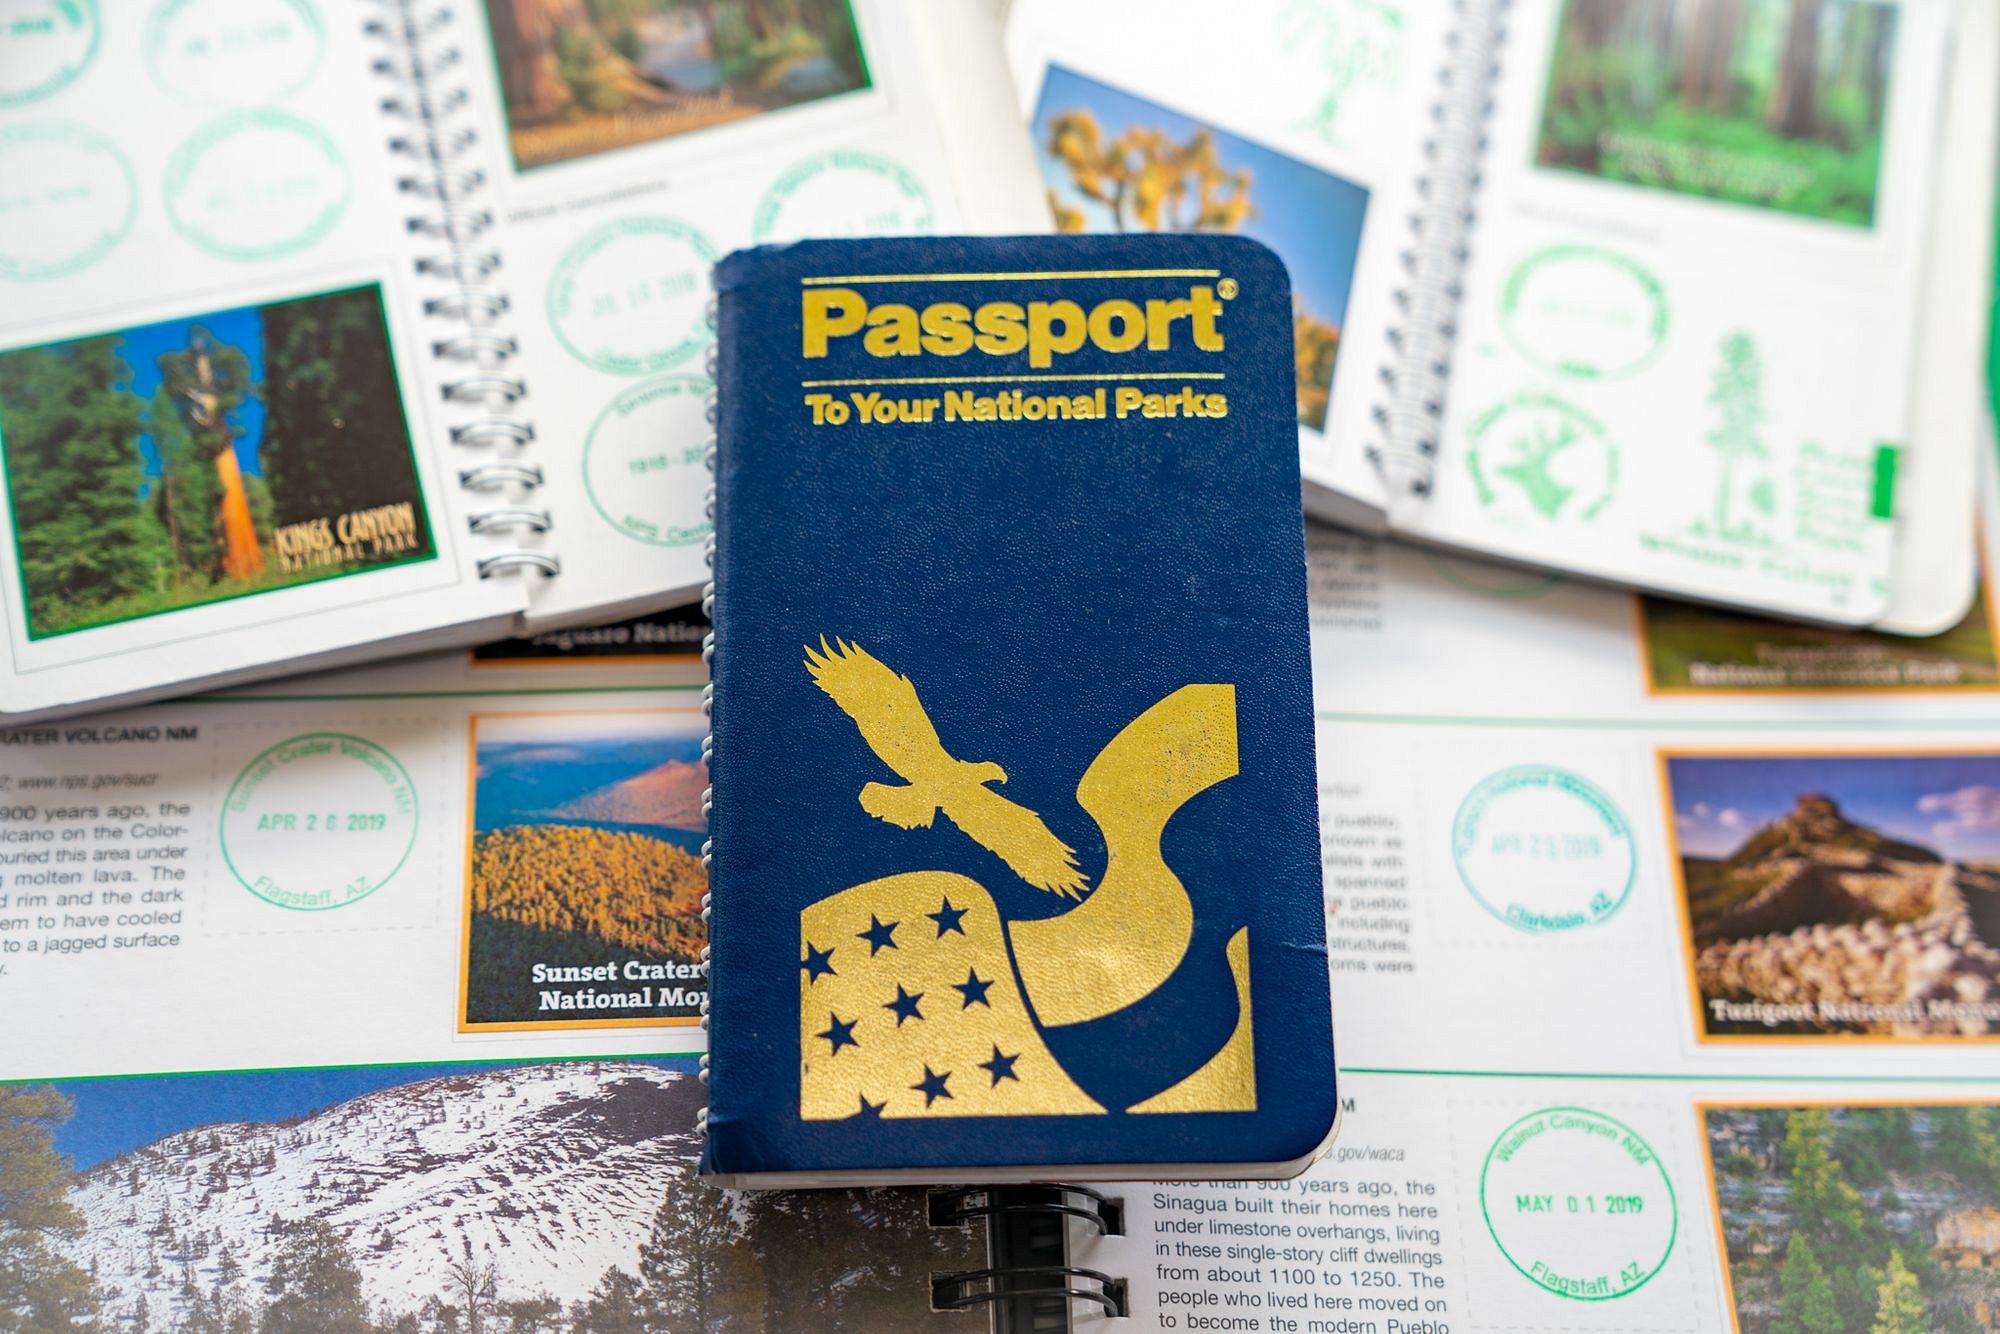 What is a National Park Passport?